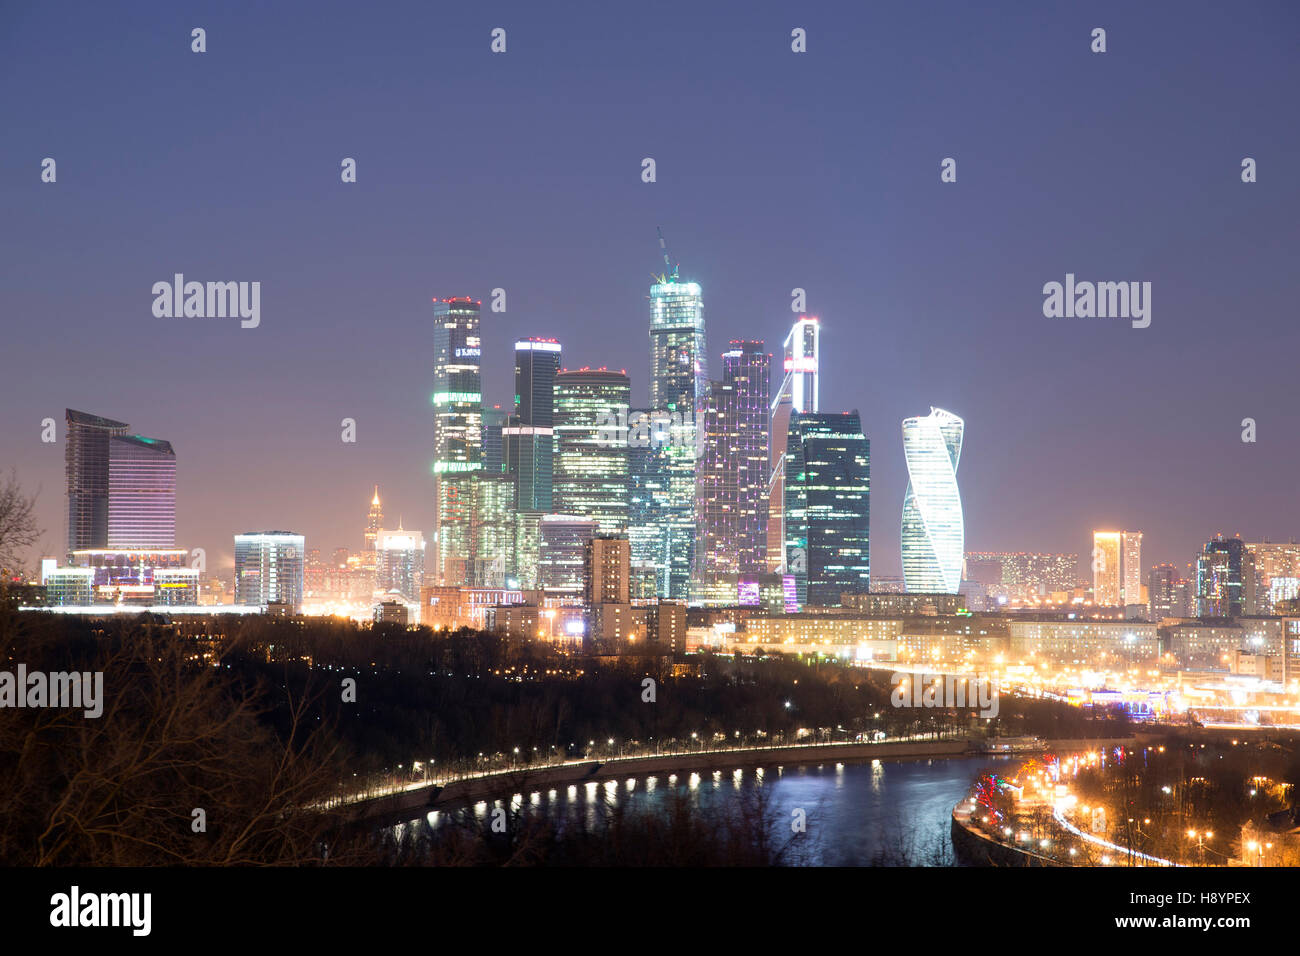 Moscow International Business Center - Moscow City at night. View from the observation platform on the Sparrow Hills. Stock Photo